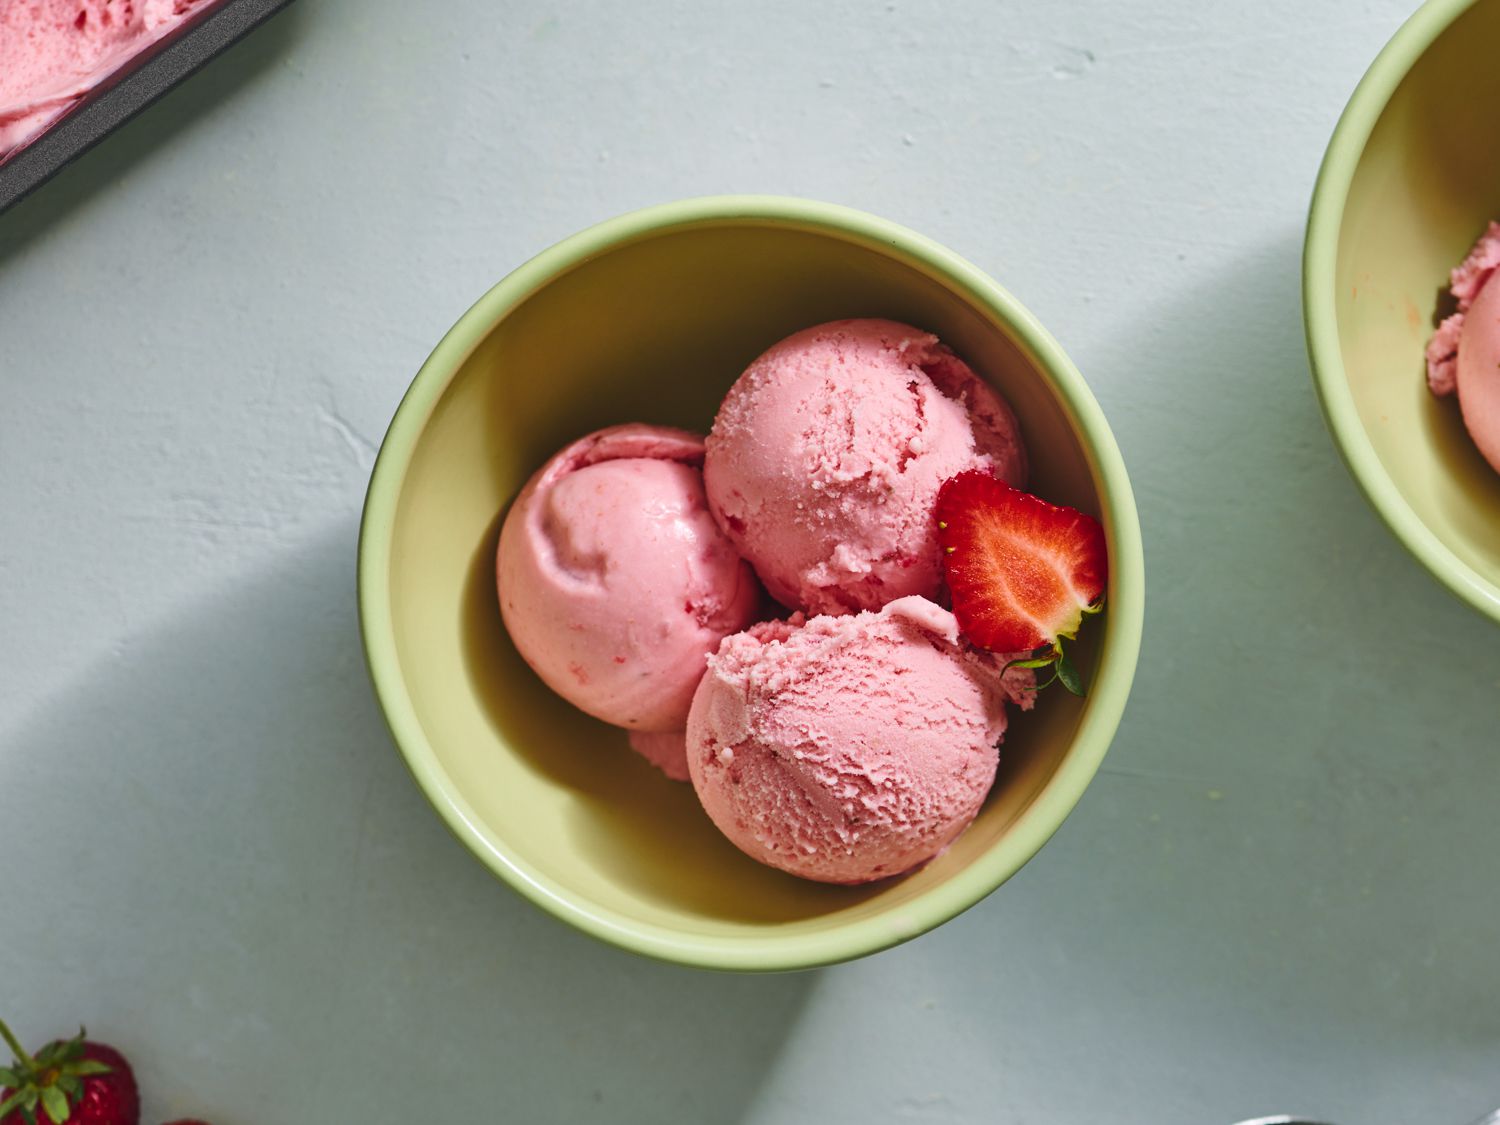 Three scoops of strawberry ice cream in a ceramic bowl, with half of a fresh strawberry.